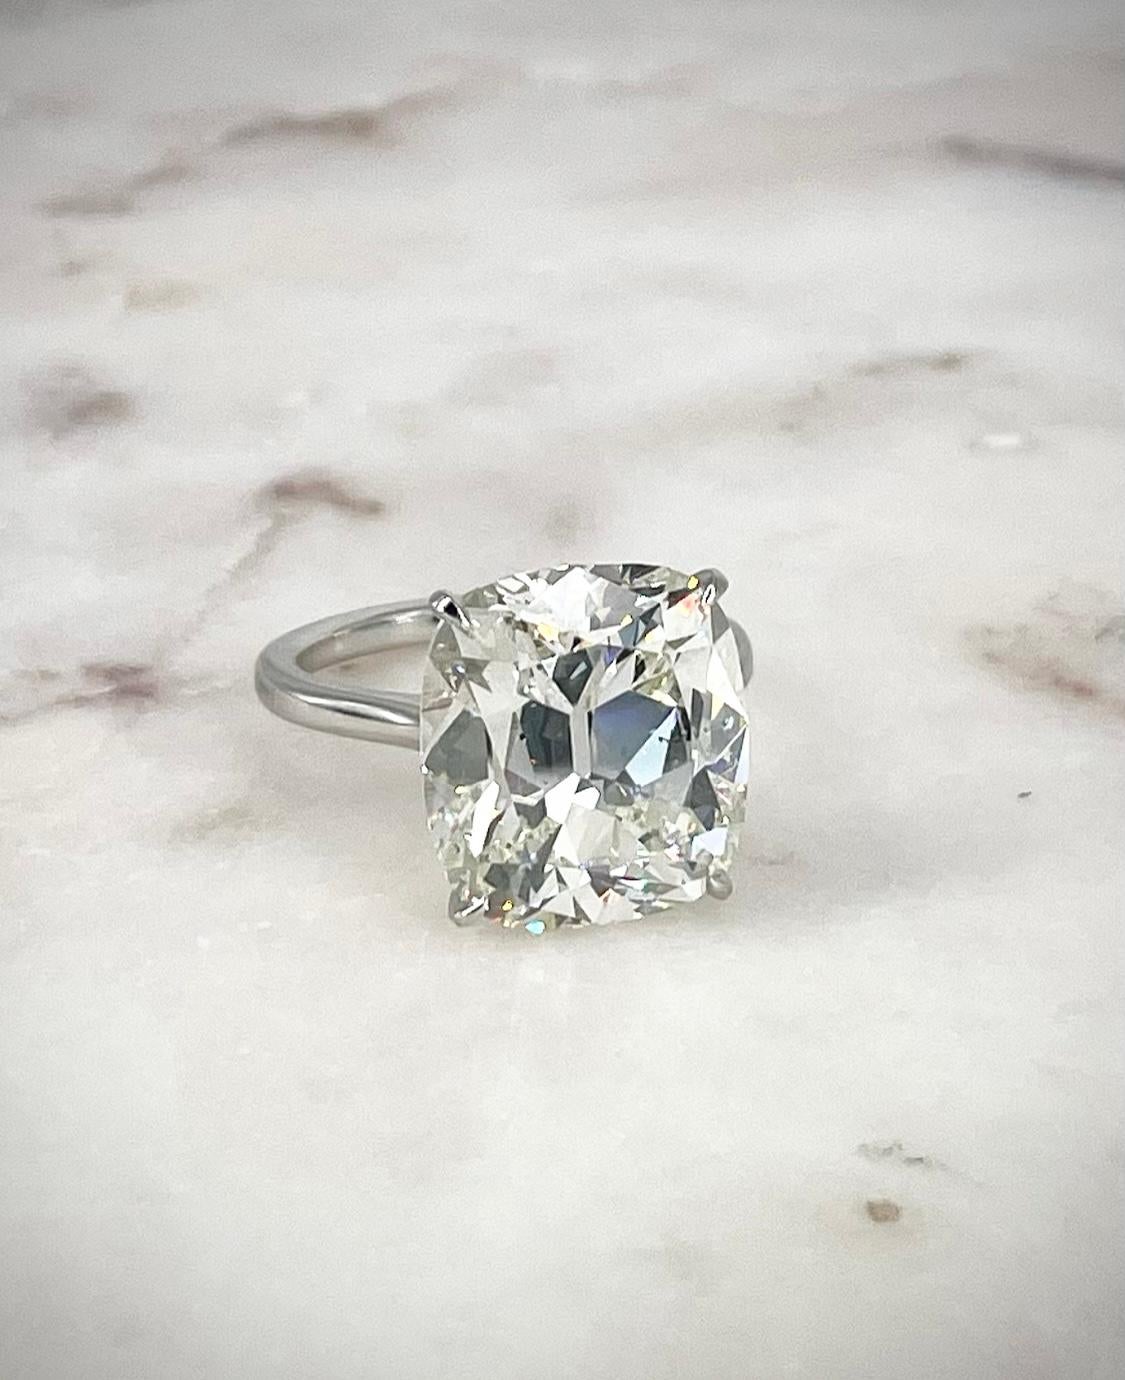 This magnificent cushion solitaire is a showstopper! The diamond is 10.38 carats and certified by GIA to be J color and SI2 clarity. This is an antique style cushion, cut with a beautiful pattern of large facets that give an Old World feel and